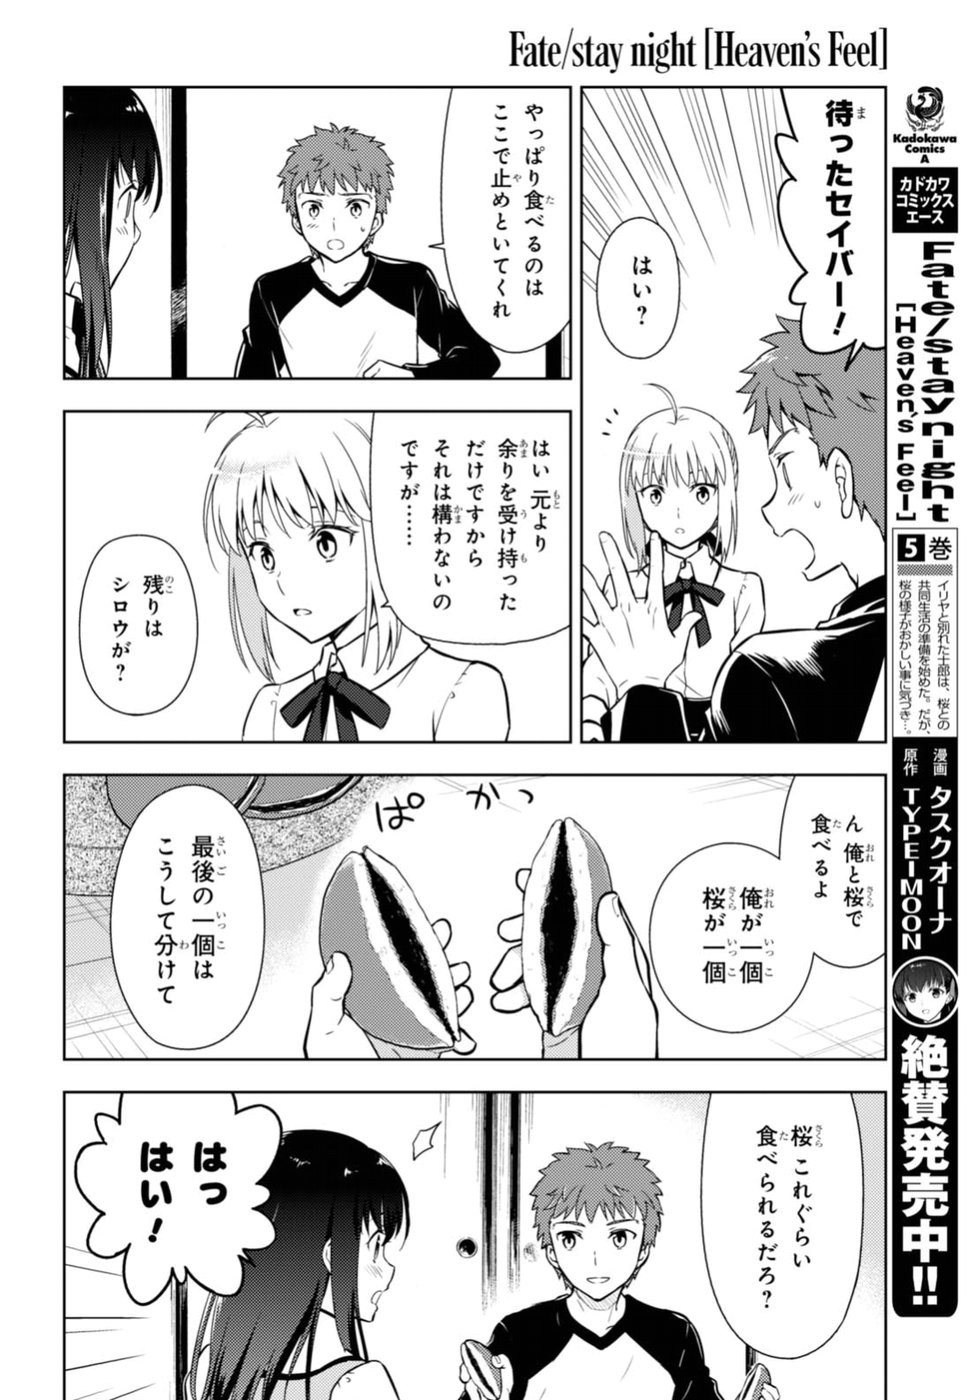 Fate/Stay night Heaven's Feel - Chapter 36 - Page 4